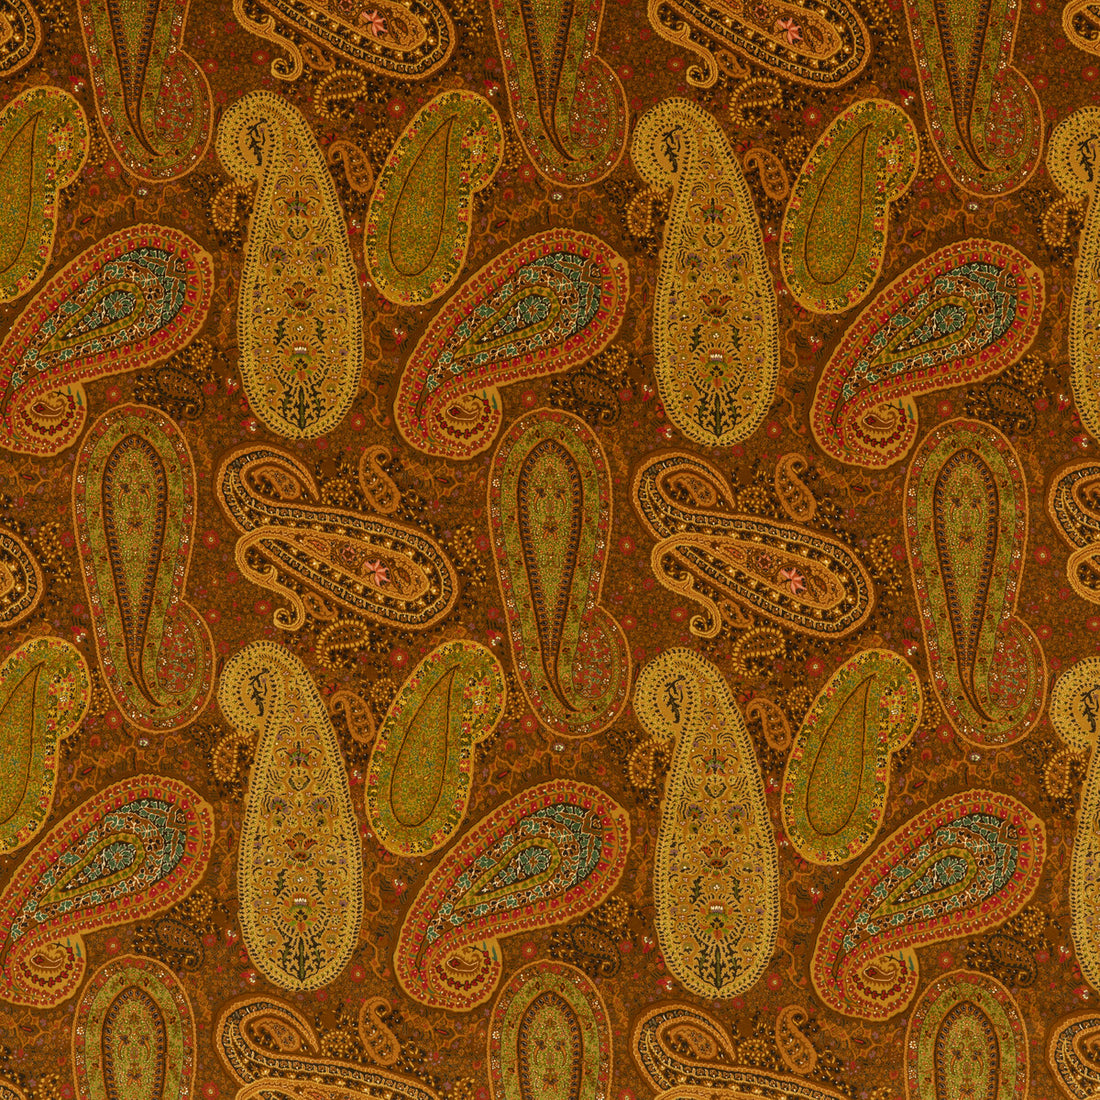 Peregrine Paisley Velvet fabric in spice color - pattern FD2002.T30.0 - by Mulberry in the Mulberry Long Weekend collection